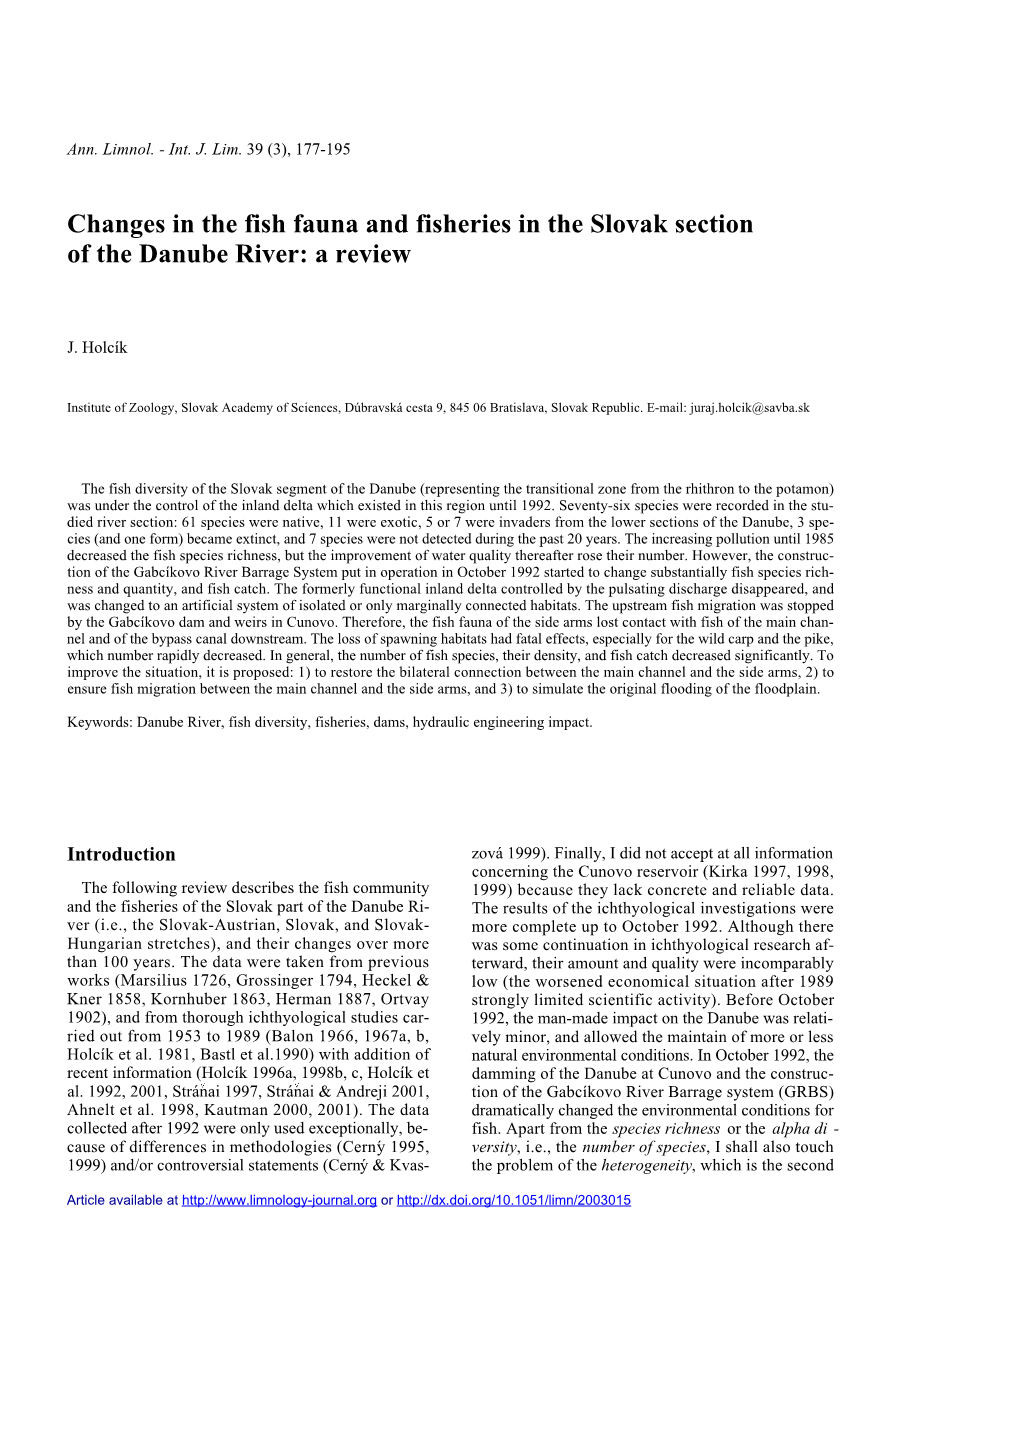 Changes in the Fish Fauna and Fisheries in the Slovak Section of the Danube River: a Review